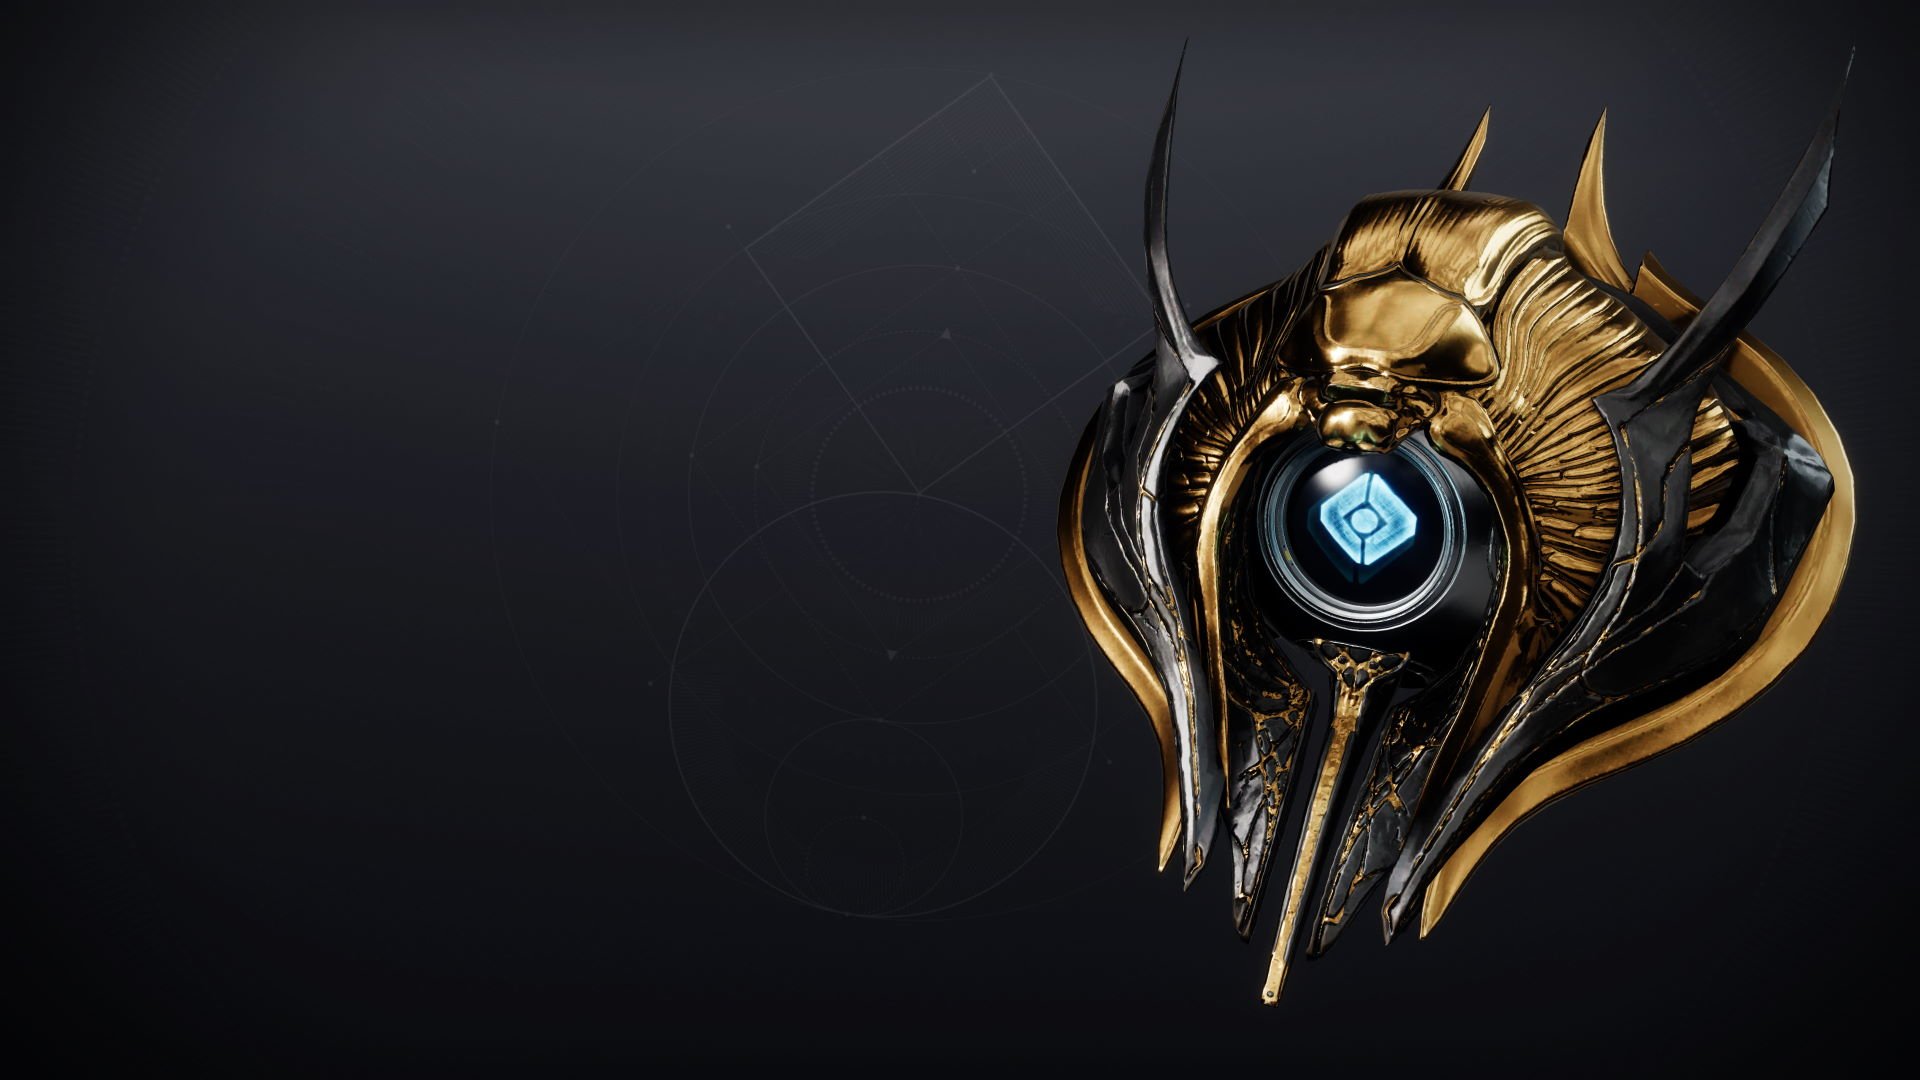 An in-game render of the In Memoriam Shell.